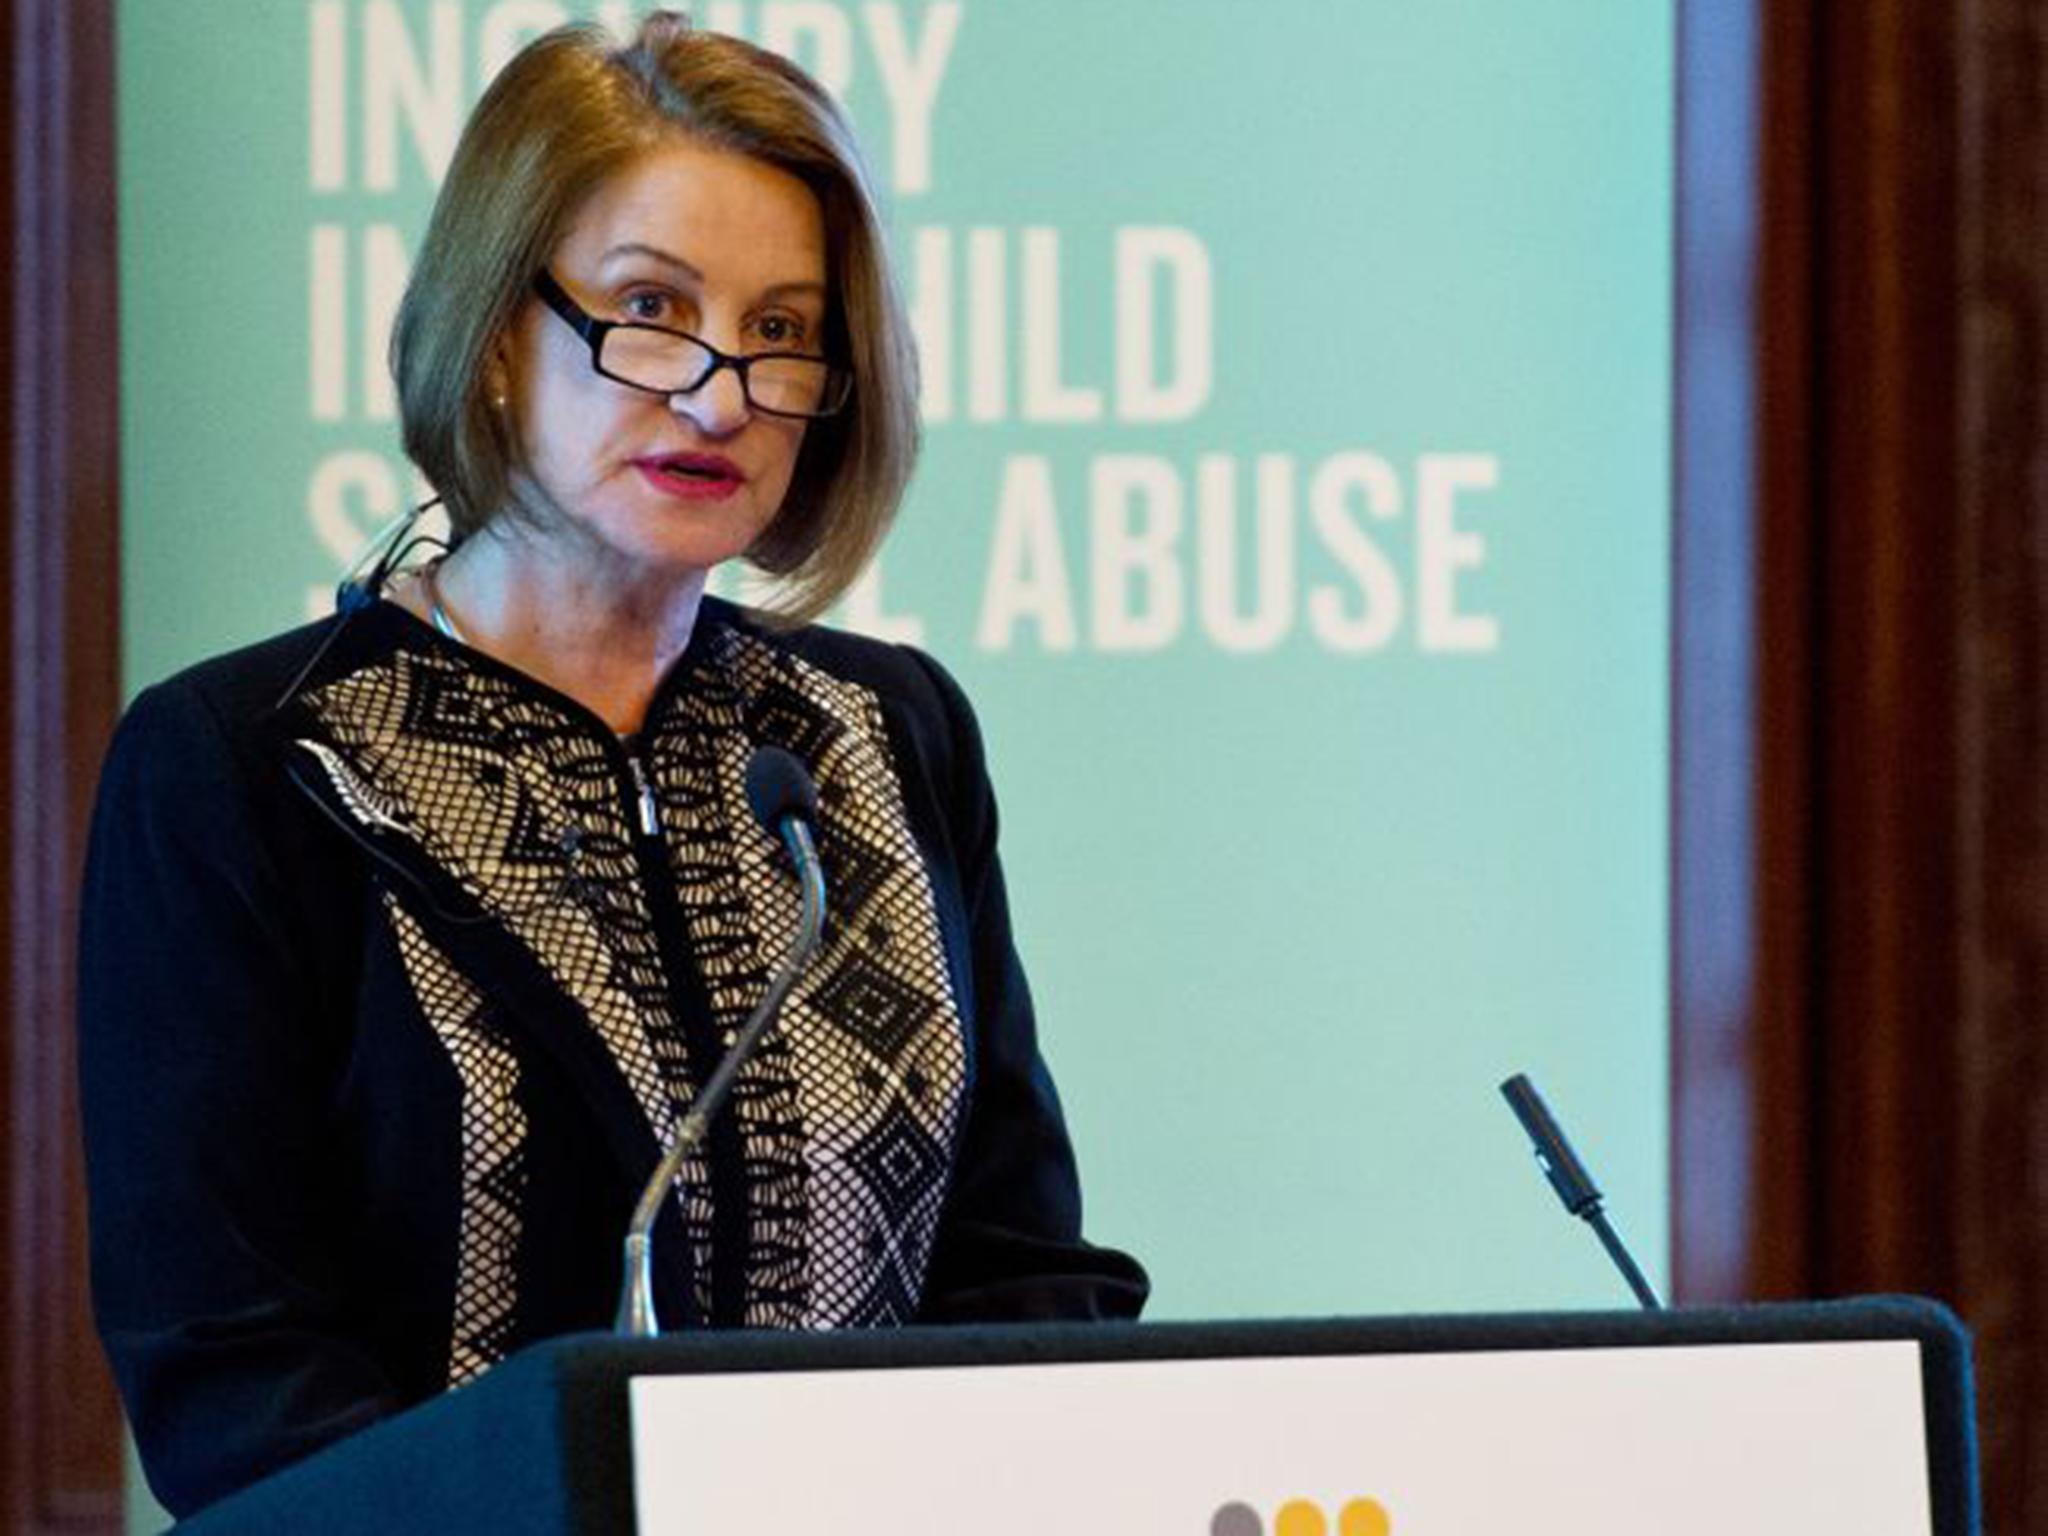 Justice Lowell Goddard is head of the Independent Inquiry into Child Sexual Abuse